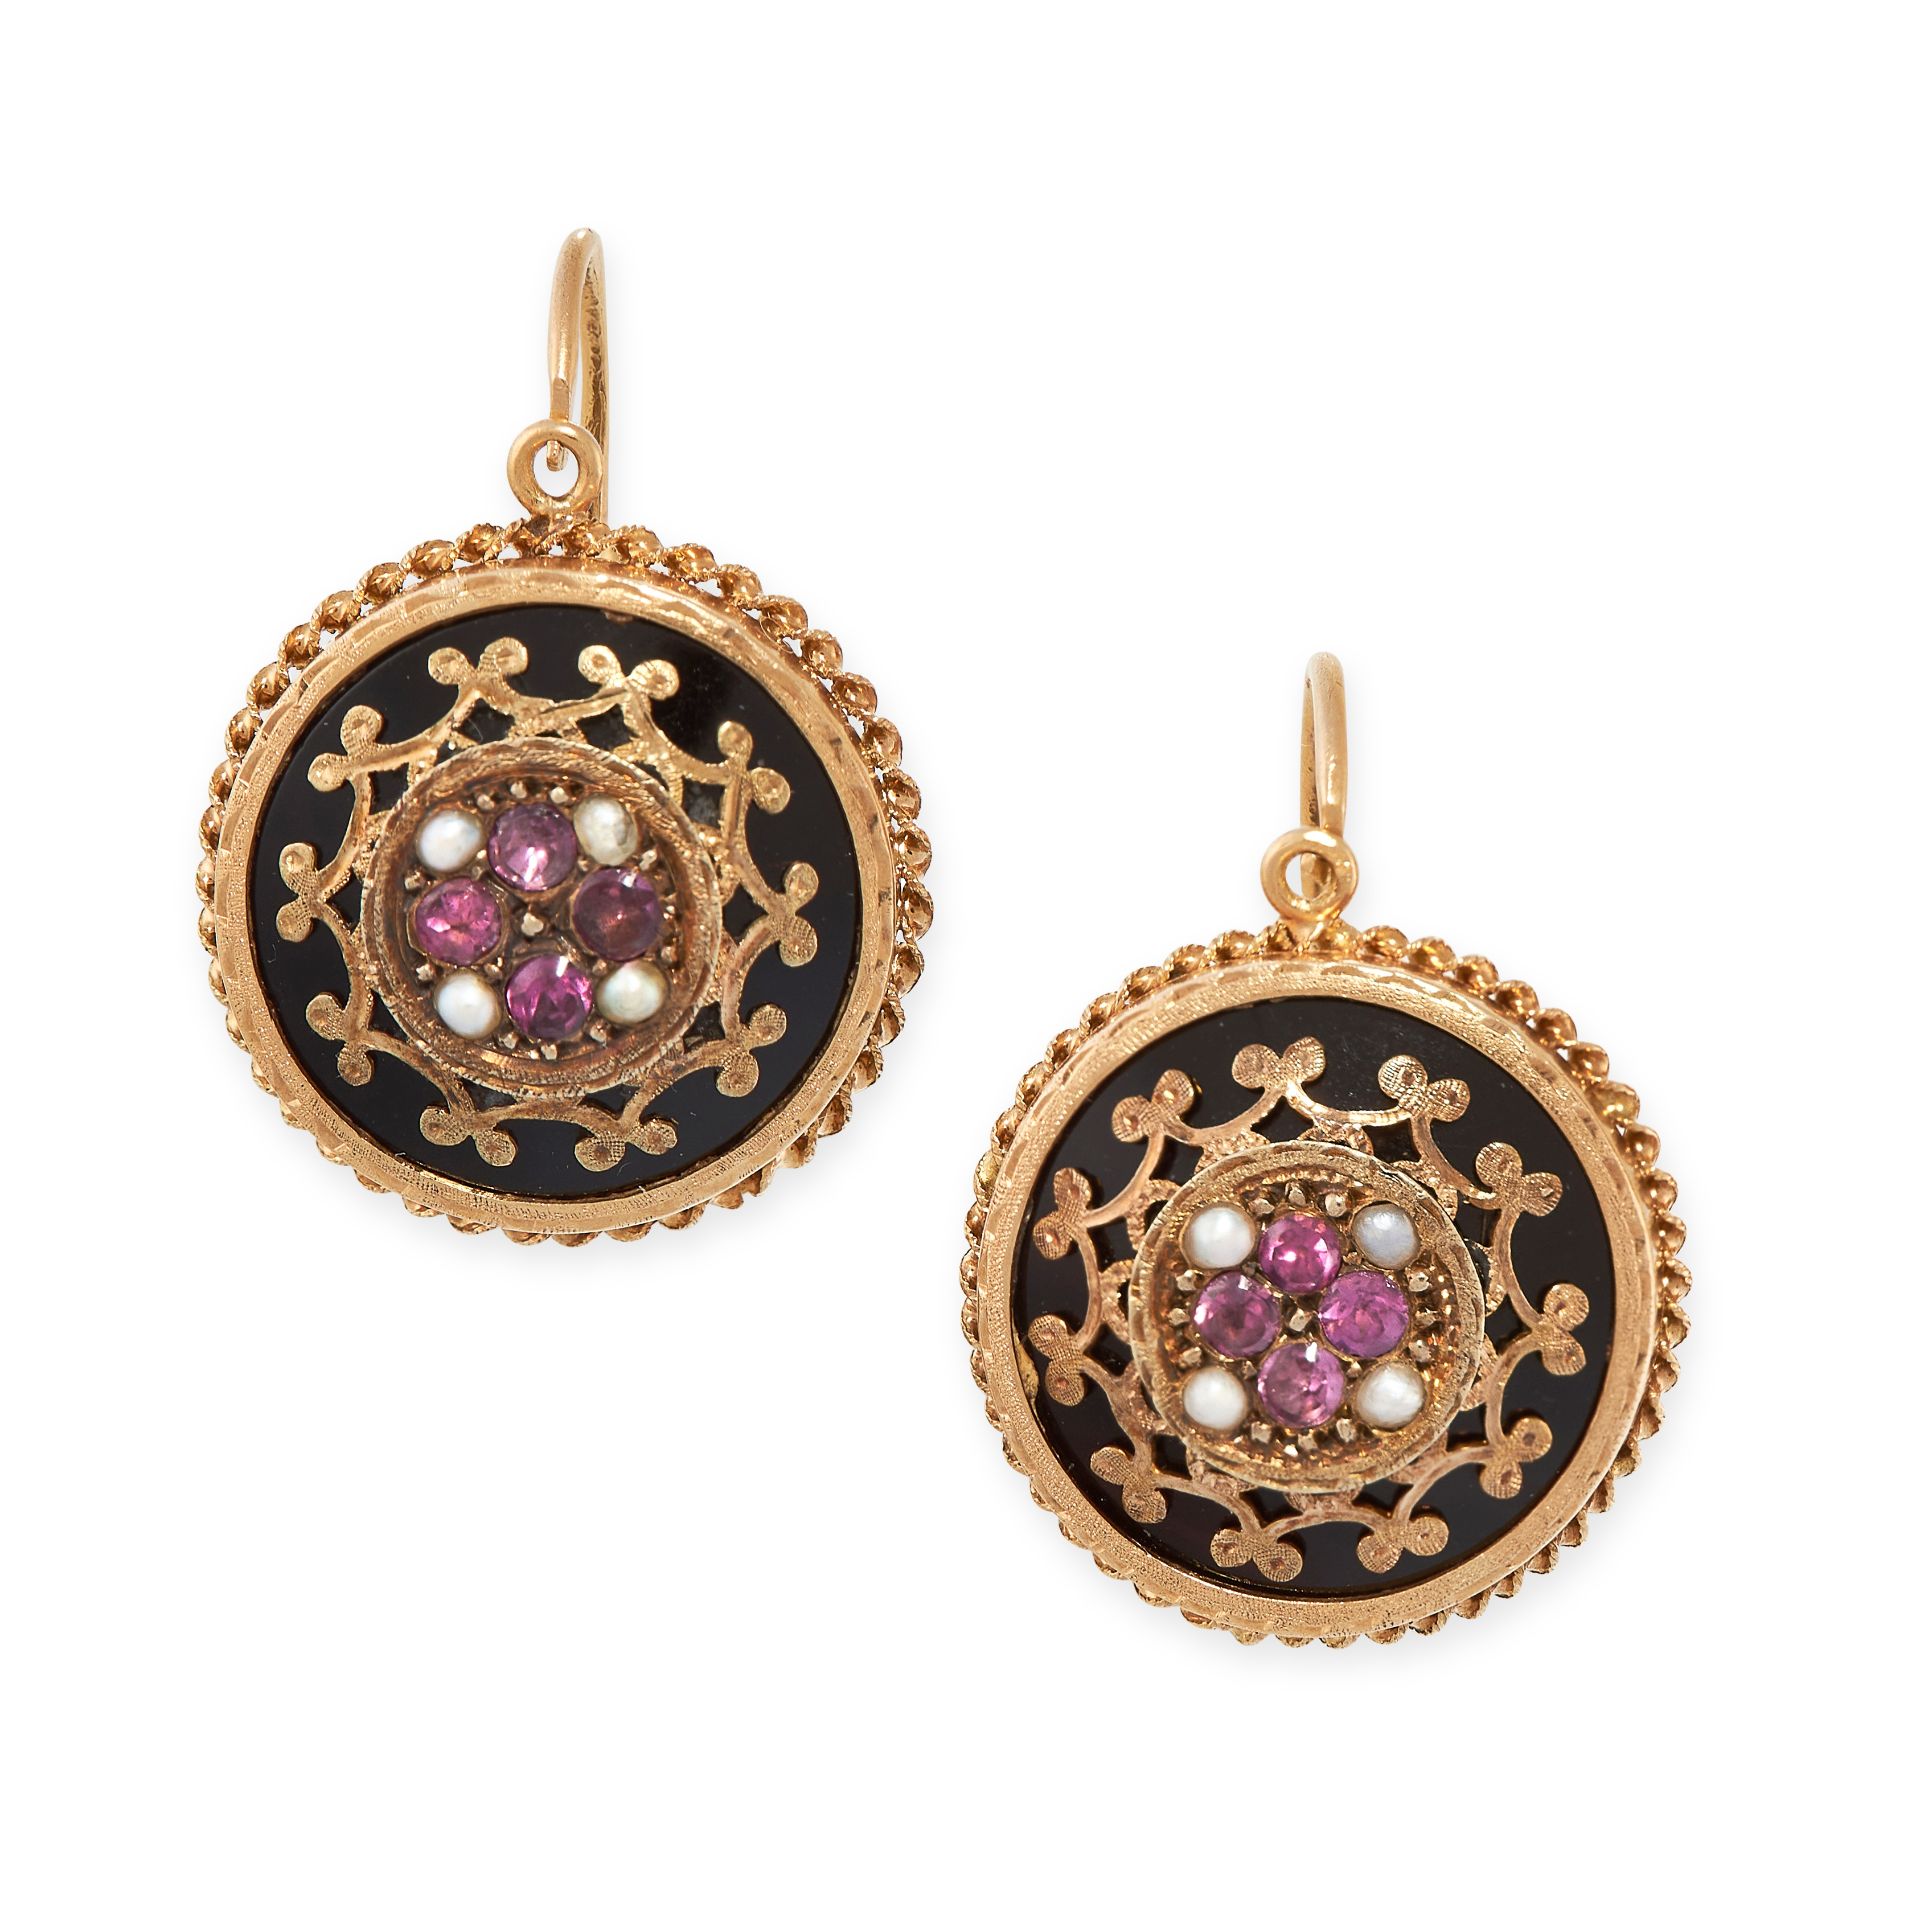 A PAIR OF ANTIQUE FRENCH ONYX, GARNET AND PEARL EARRINGS in 18ct yellow gold, the circular bodies